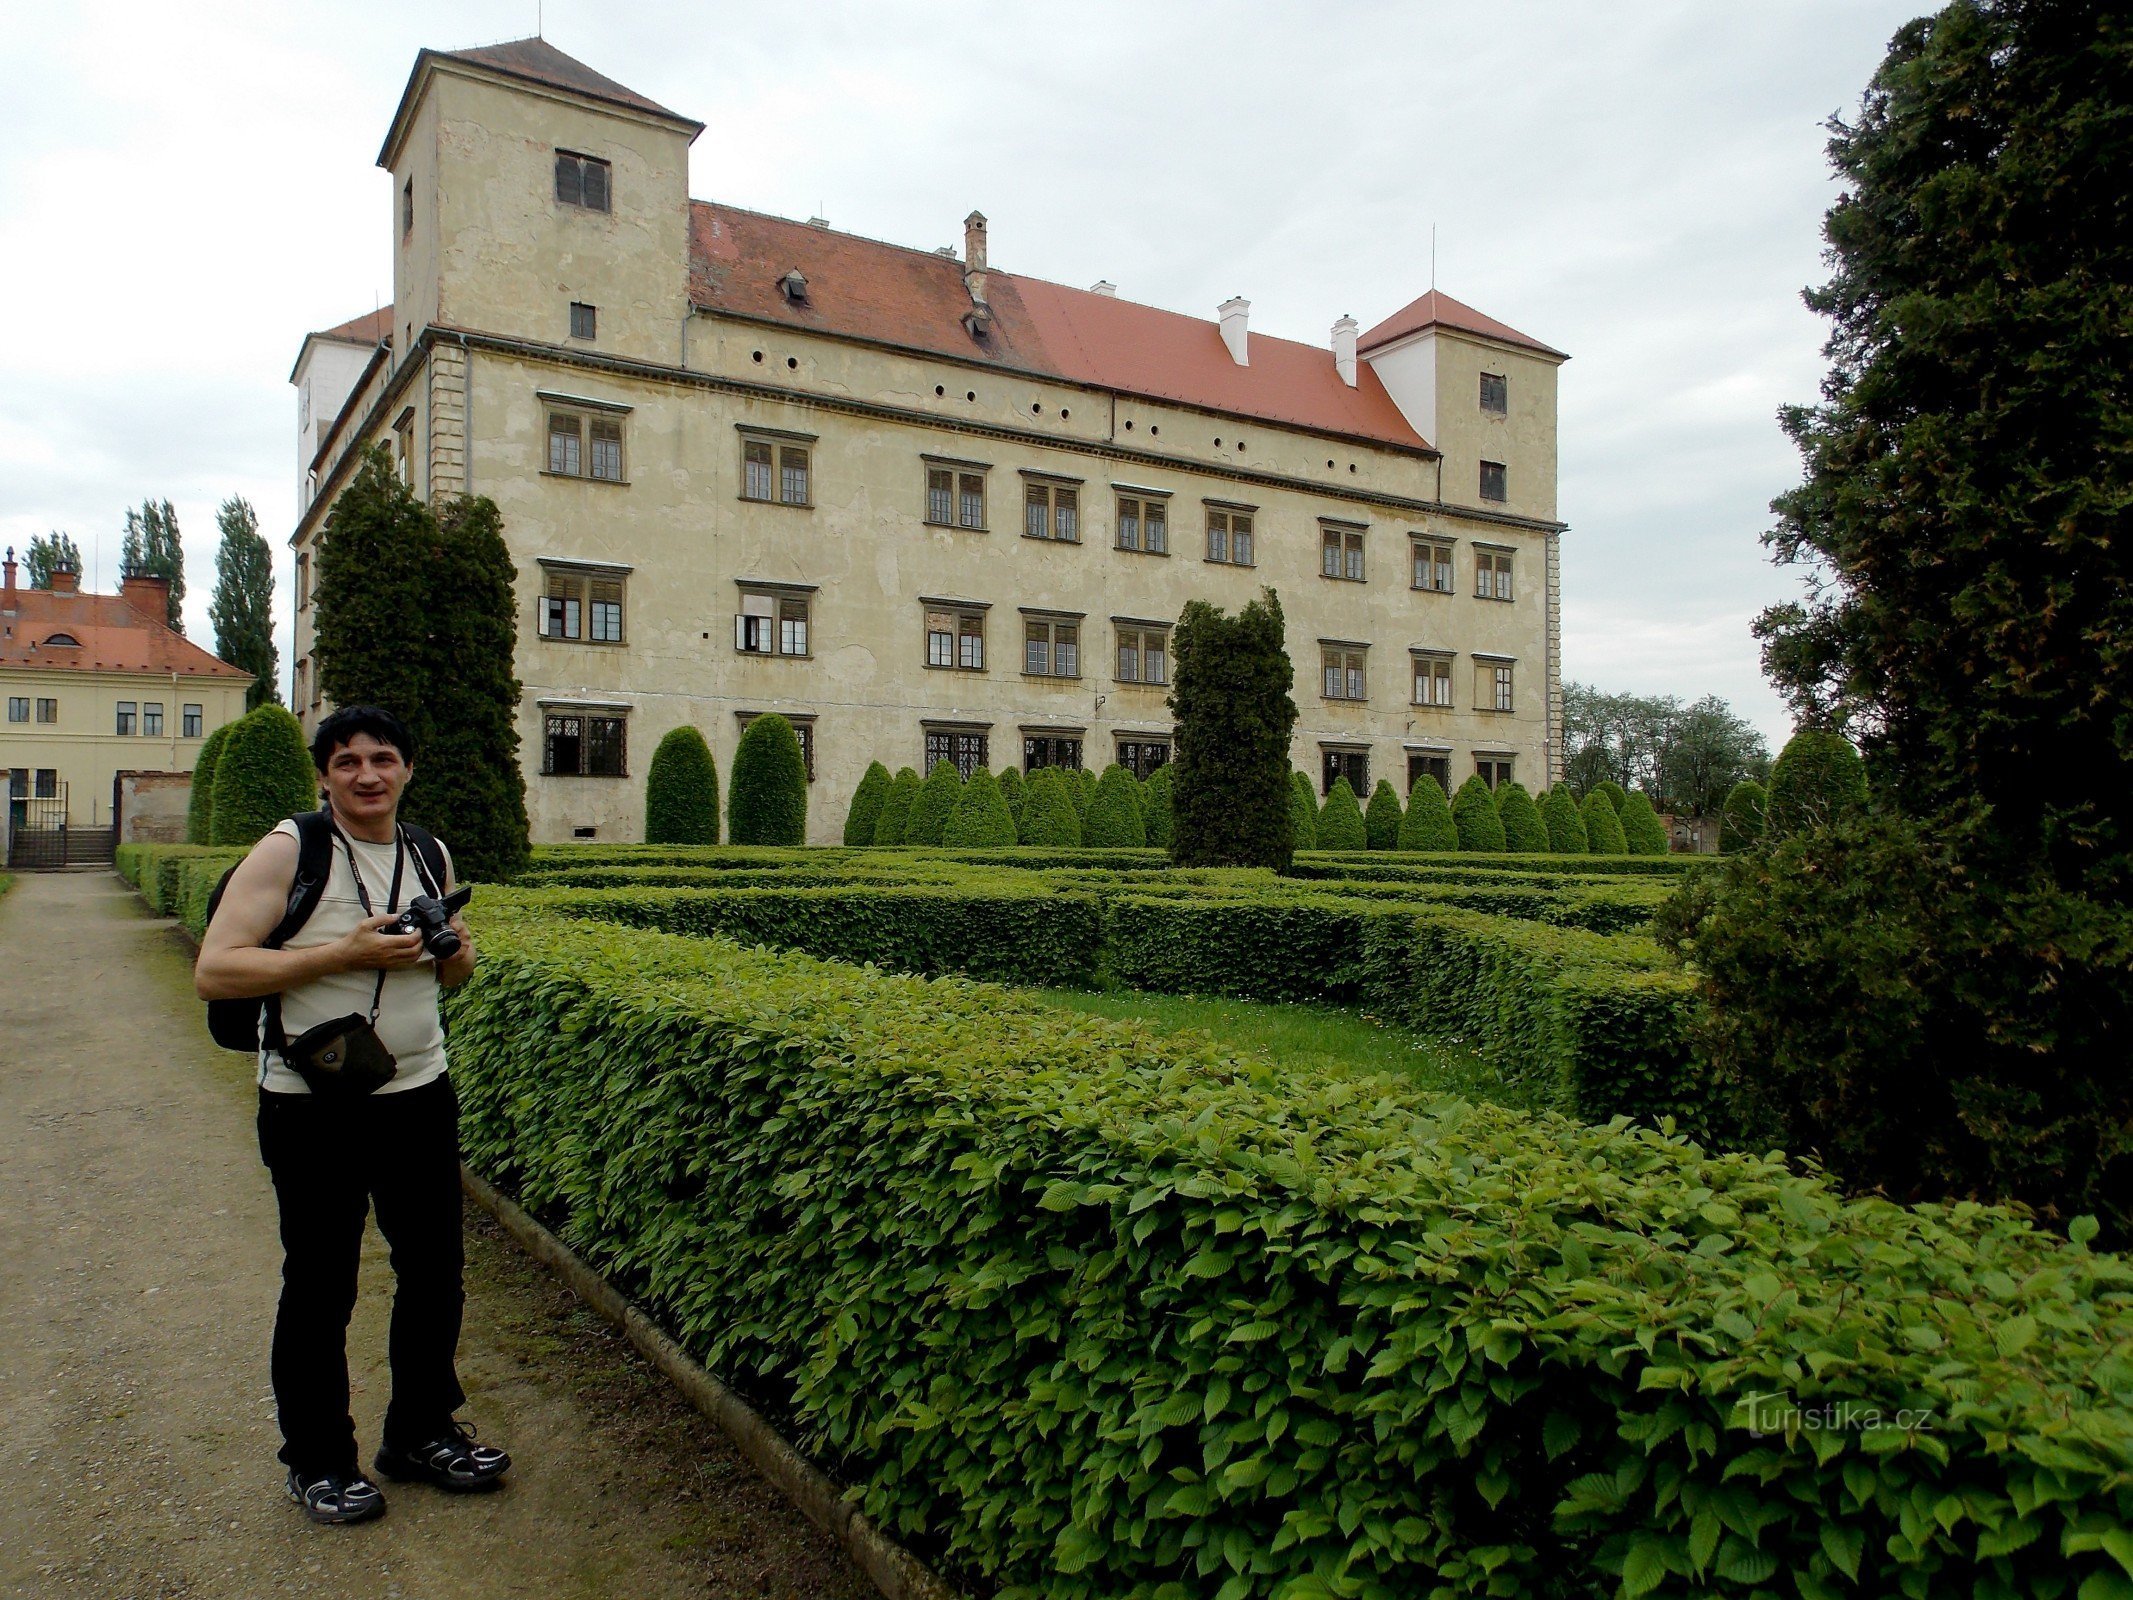 At the castle in Bučovice